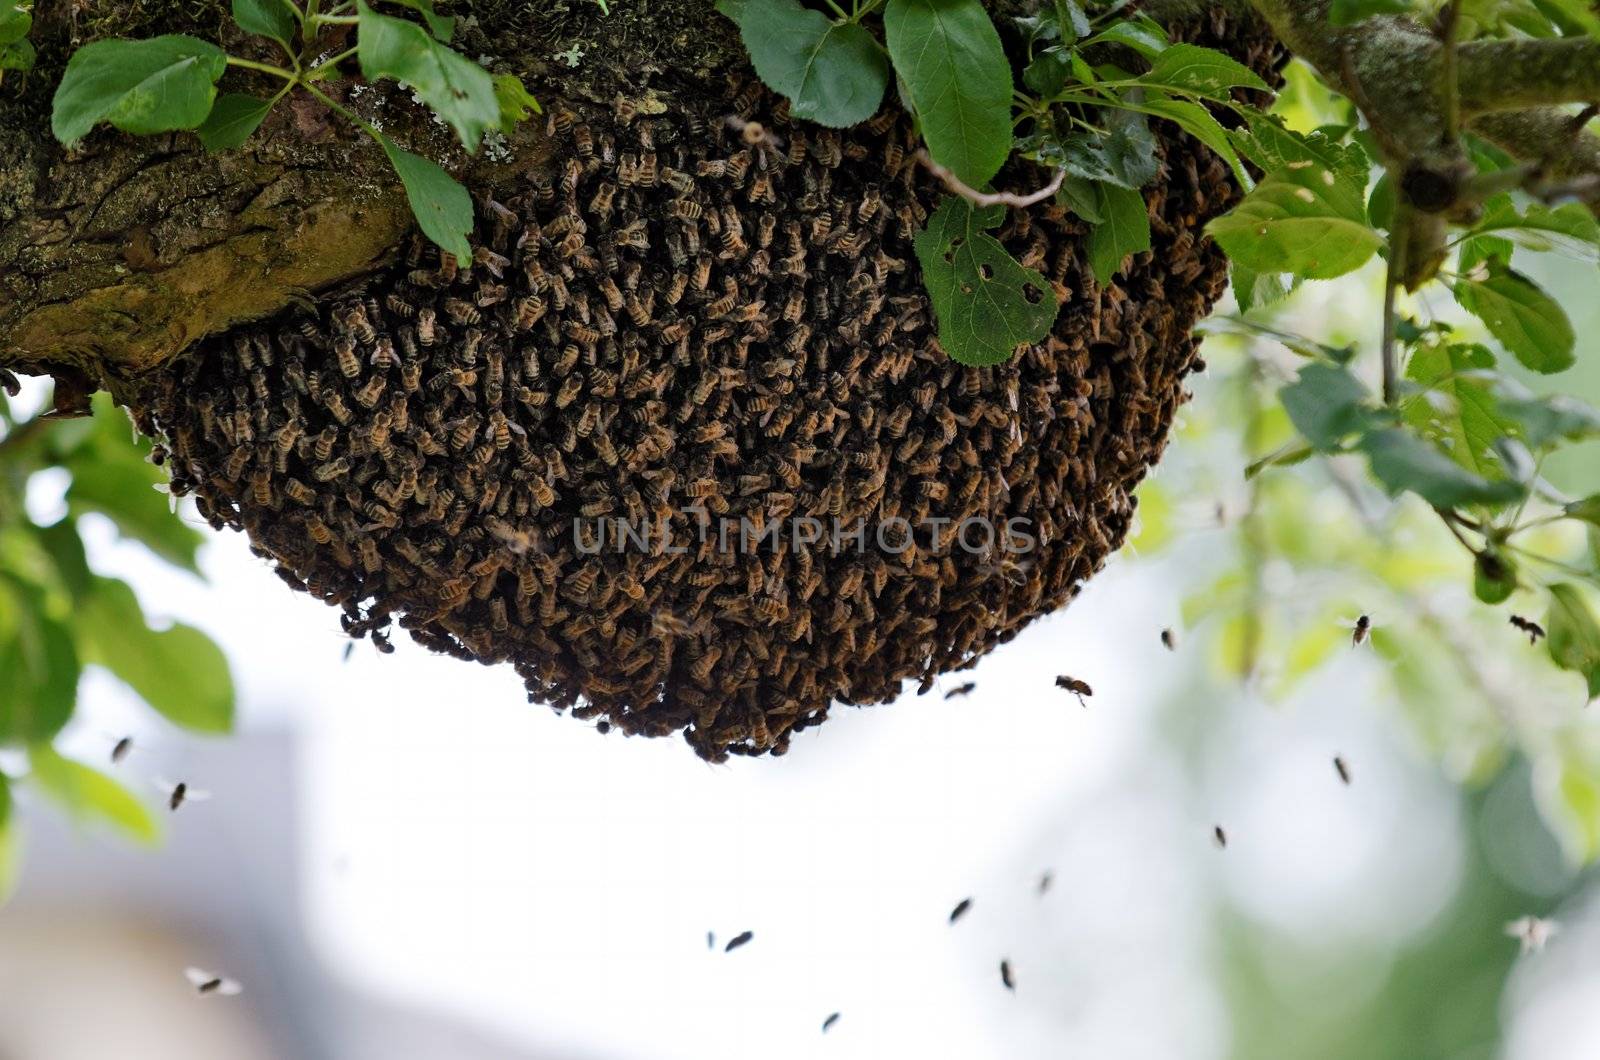 a swarm of bees in a tree